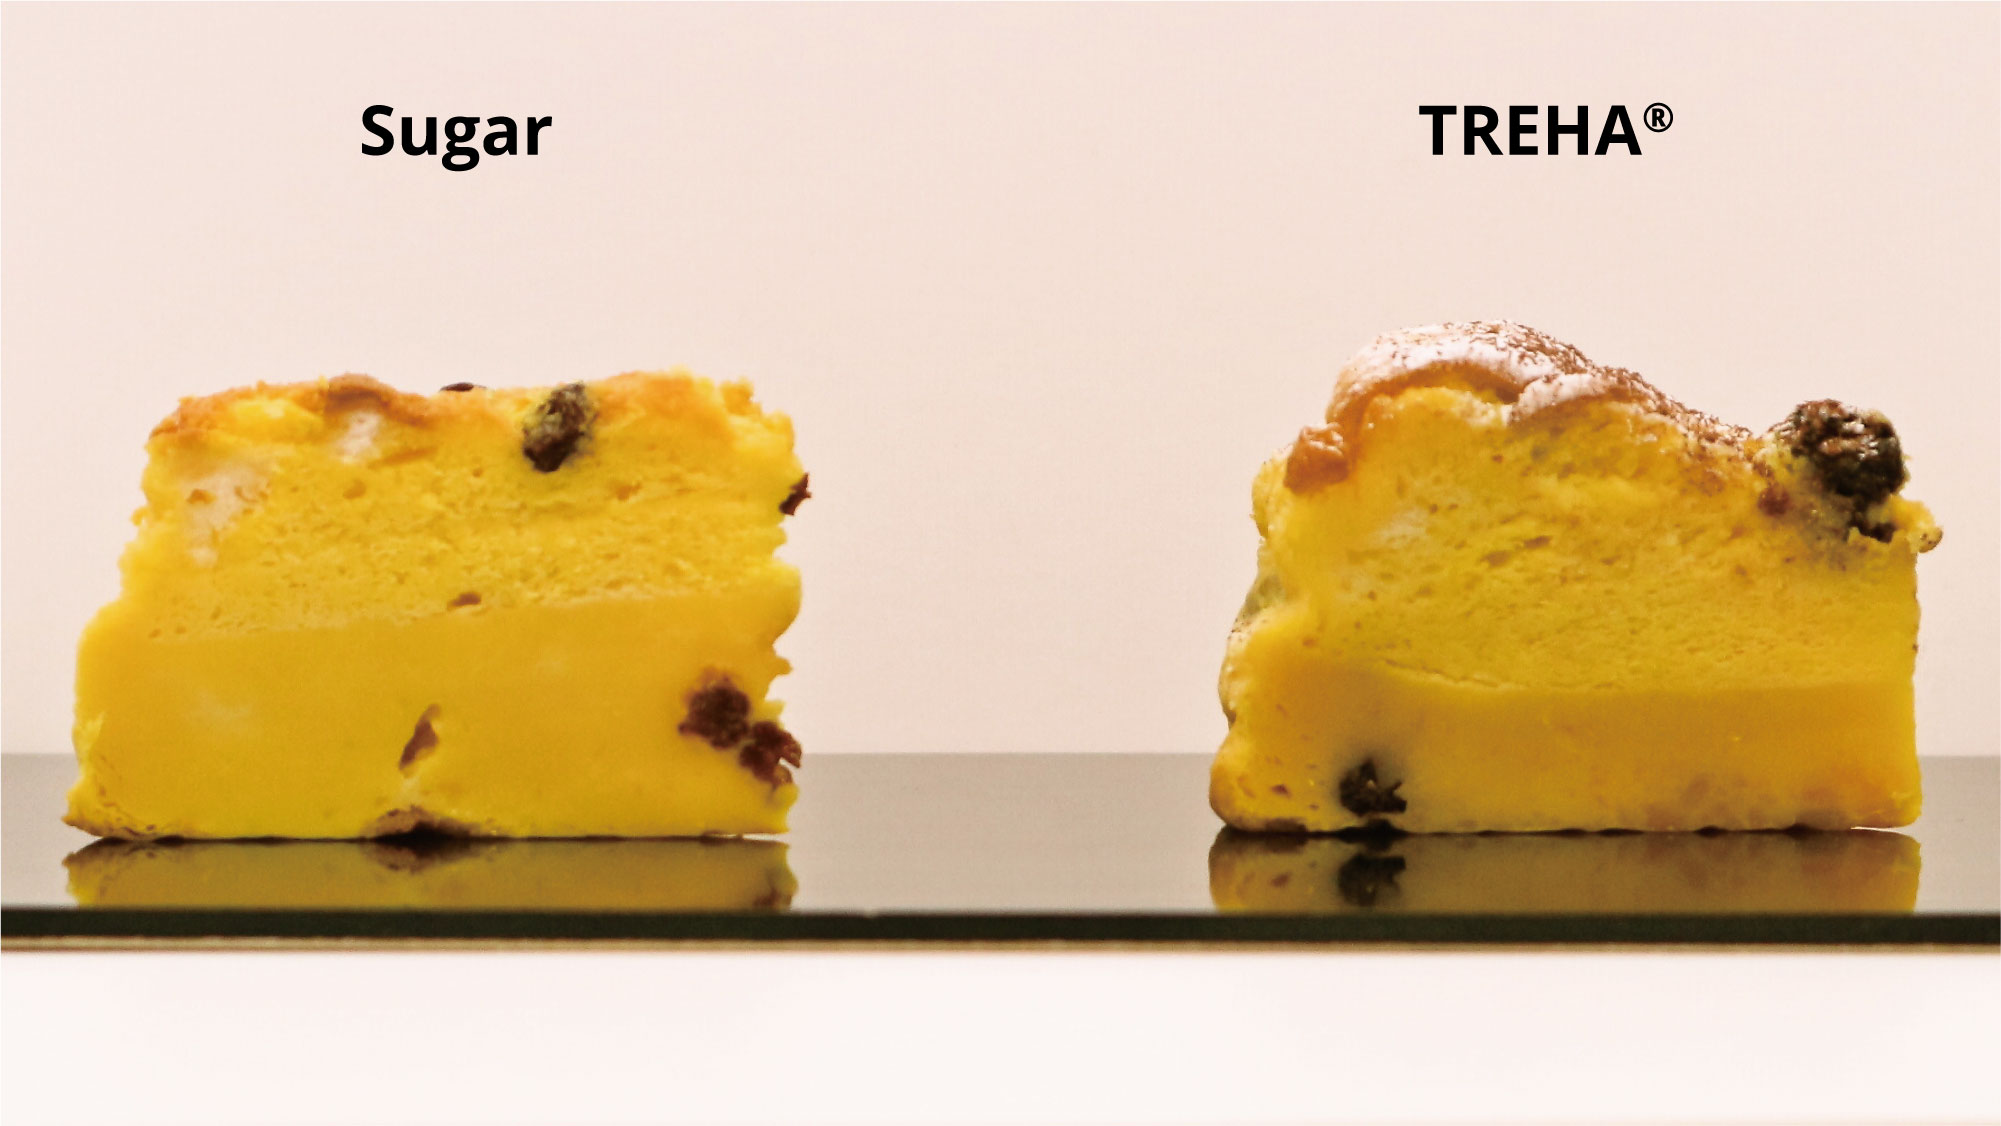 Left:  Cake containing sugar only, Right: Cake containing sugar and TREHA. 